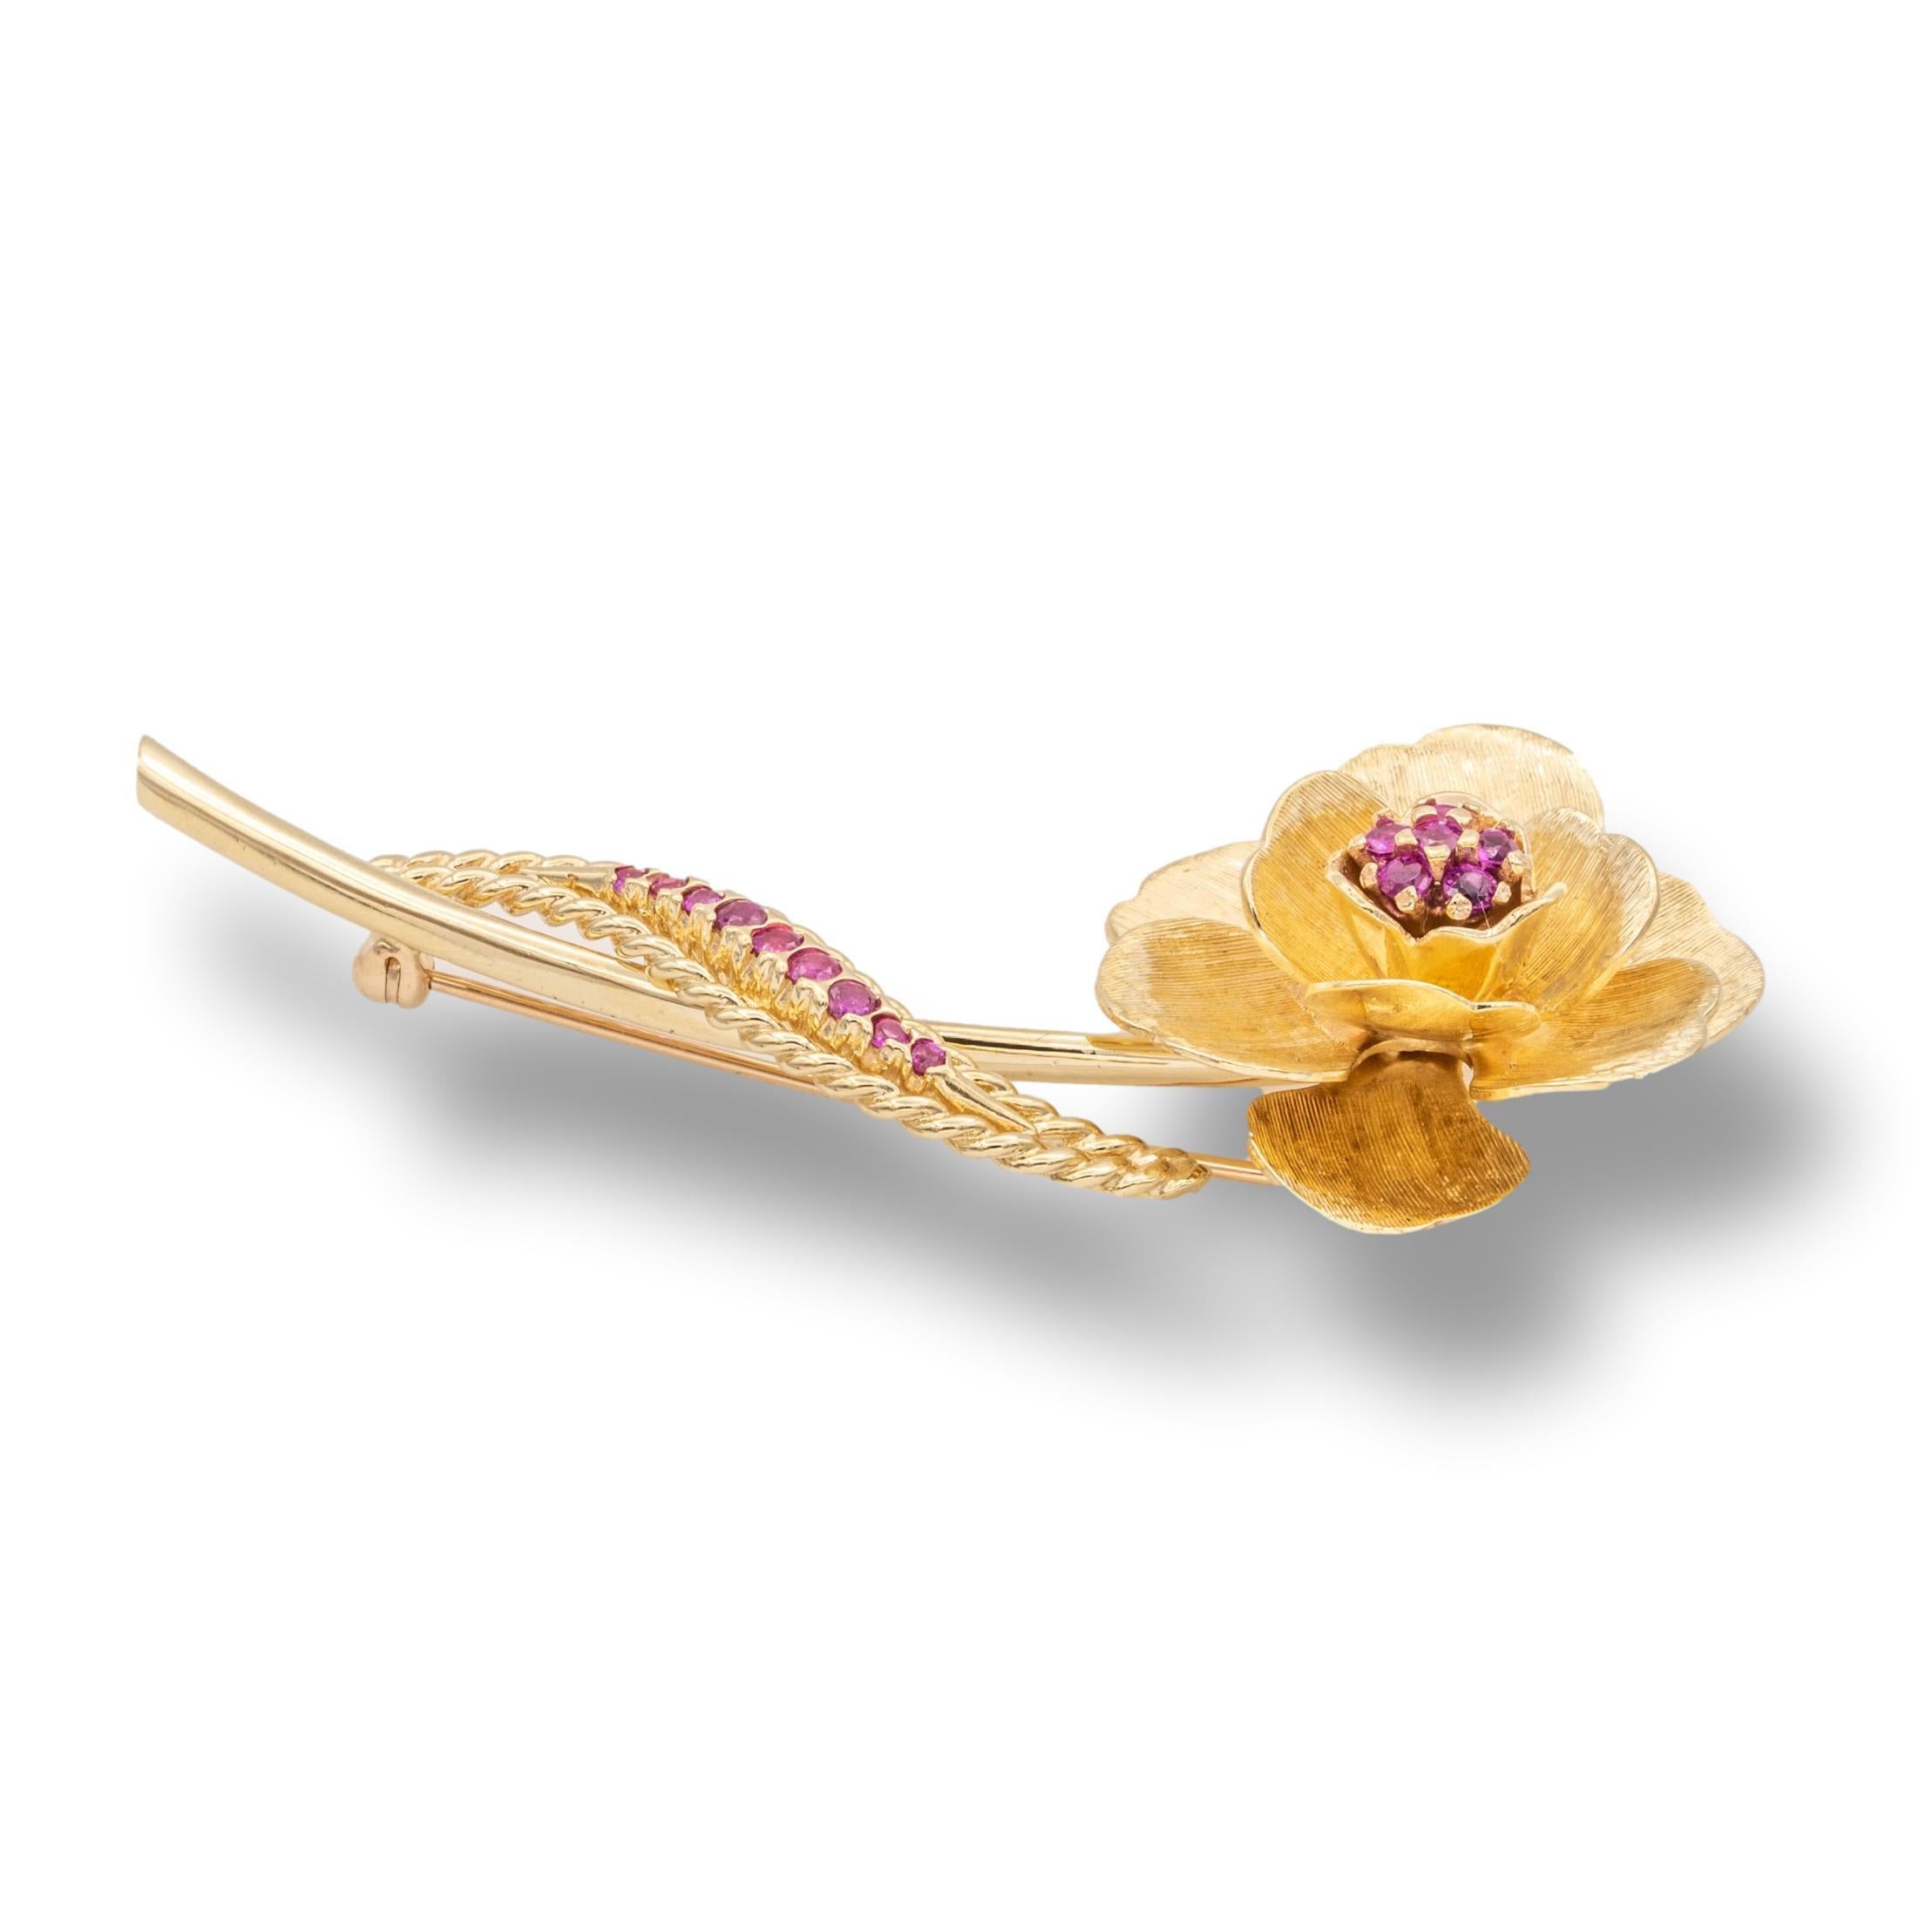 Vintage Cartier Flower brooch finely crafted in 14 karat rose gold with raspberry red rubies. This brooch has a satin finish and measures 2.75